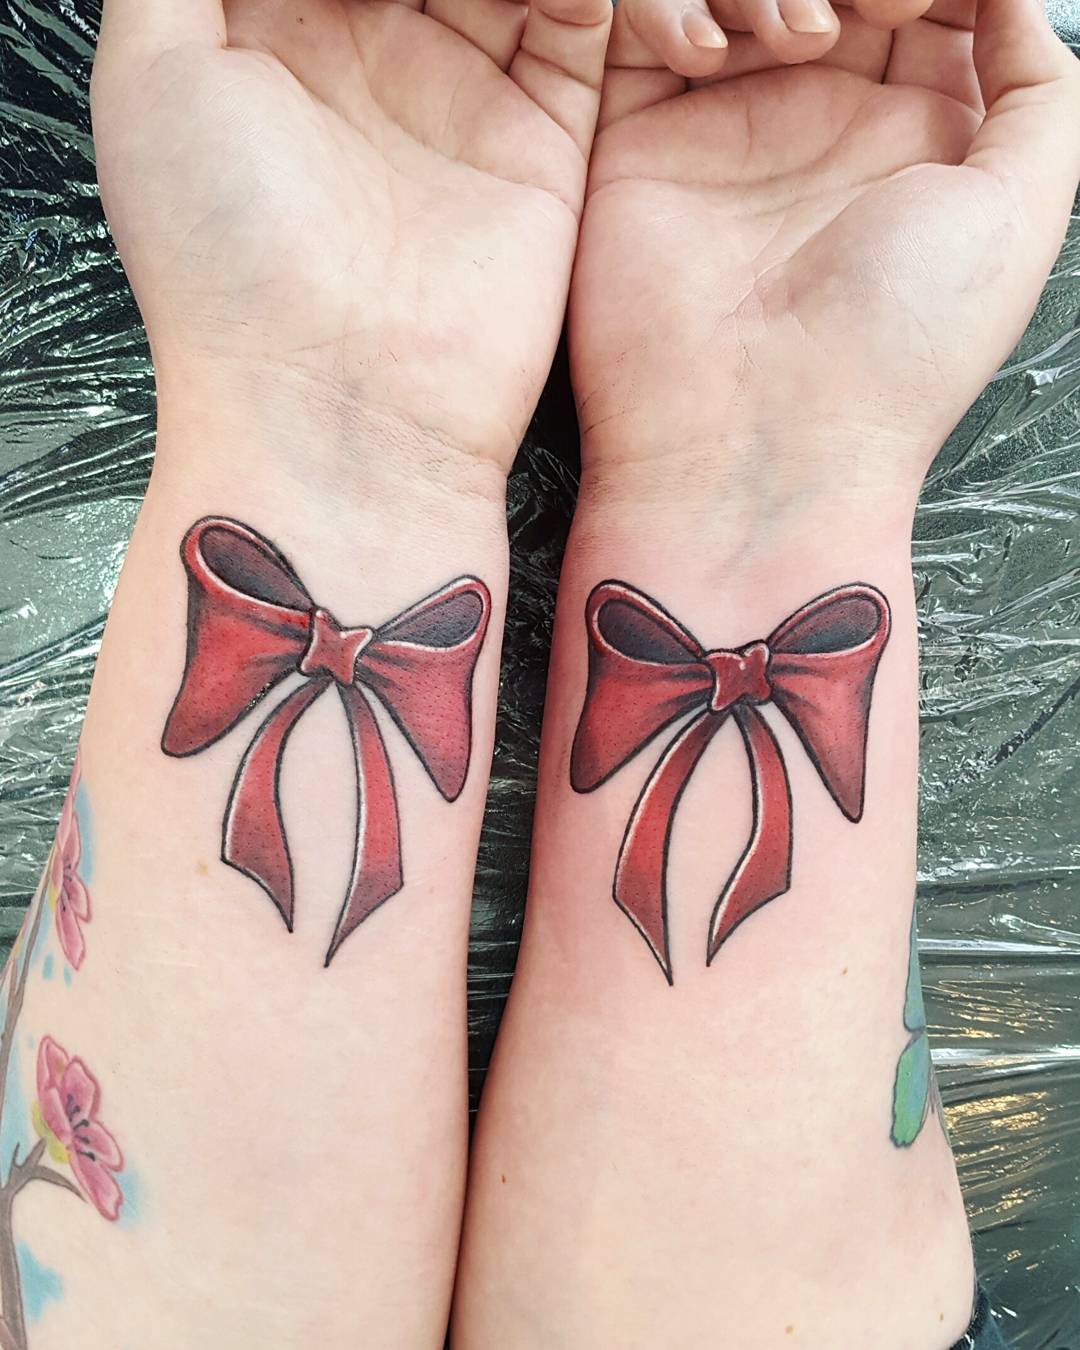 The Meaning of a Bow Tattoo: An Expression of Style and Symbolism